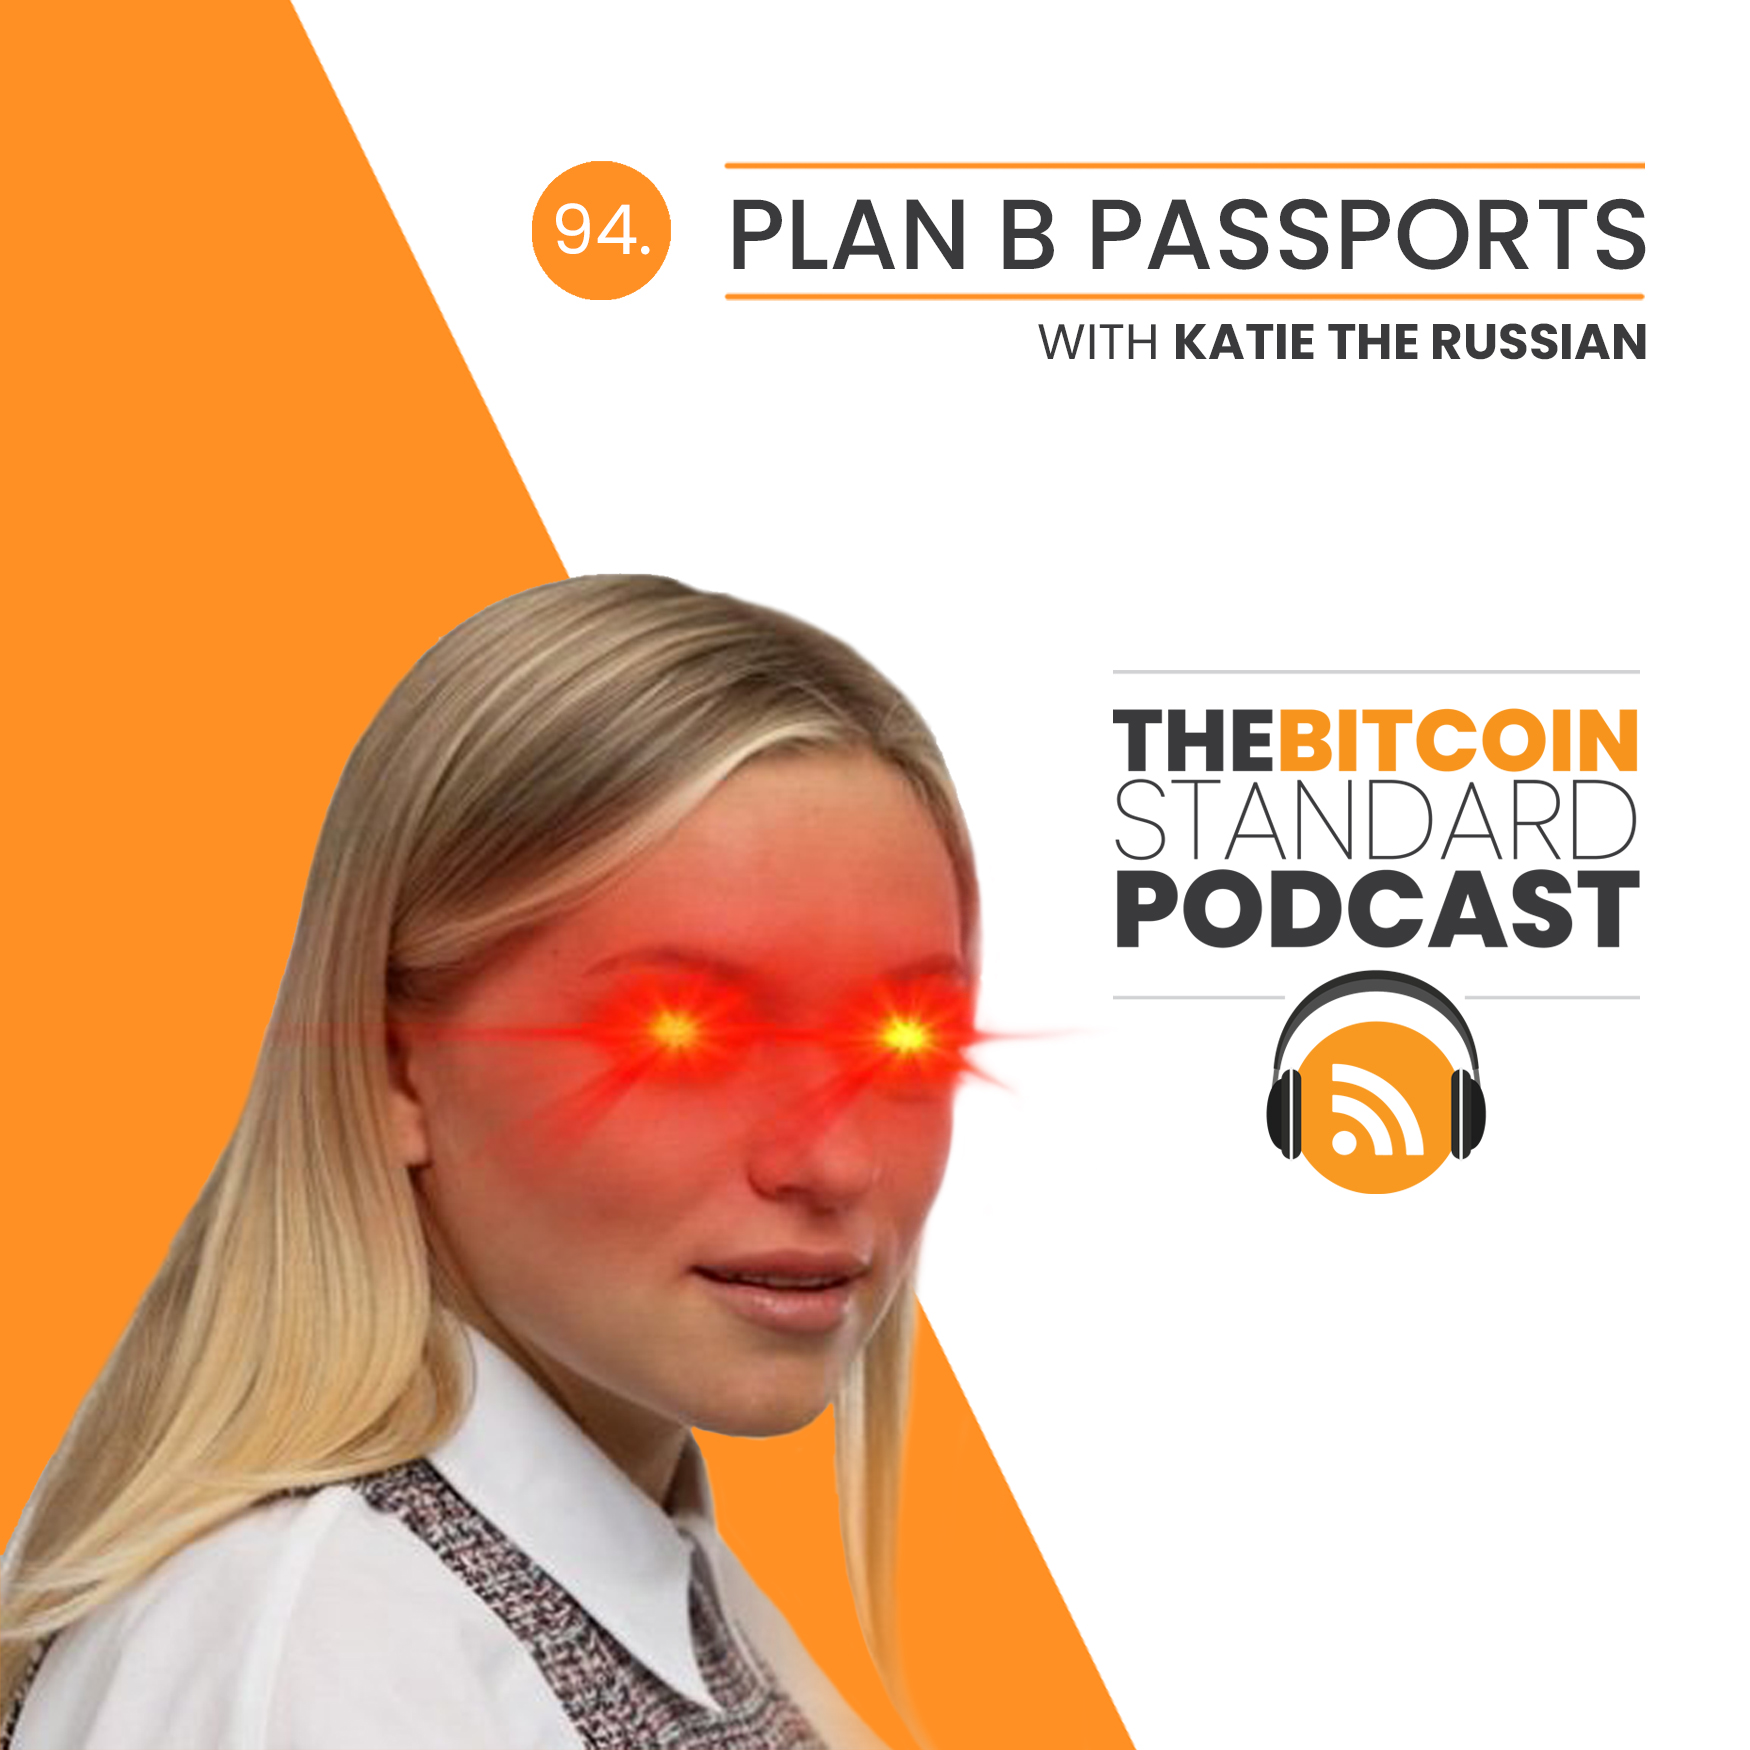 94. Plan B Passports with Katie The Russian